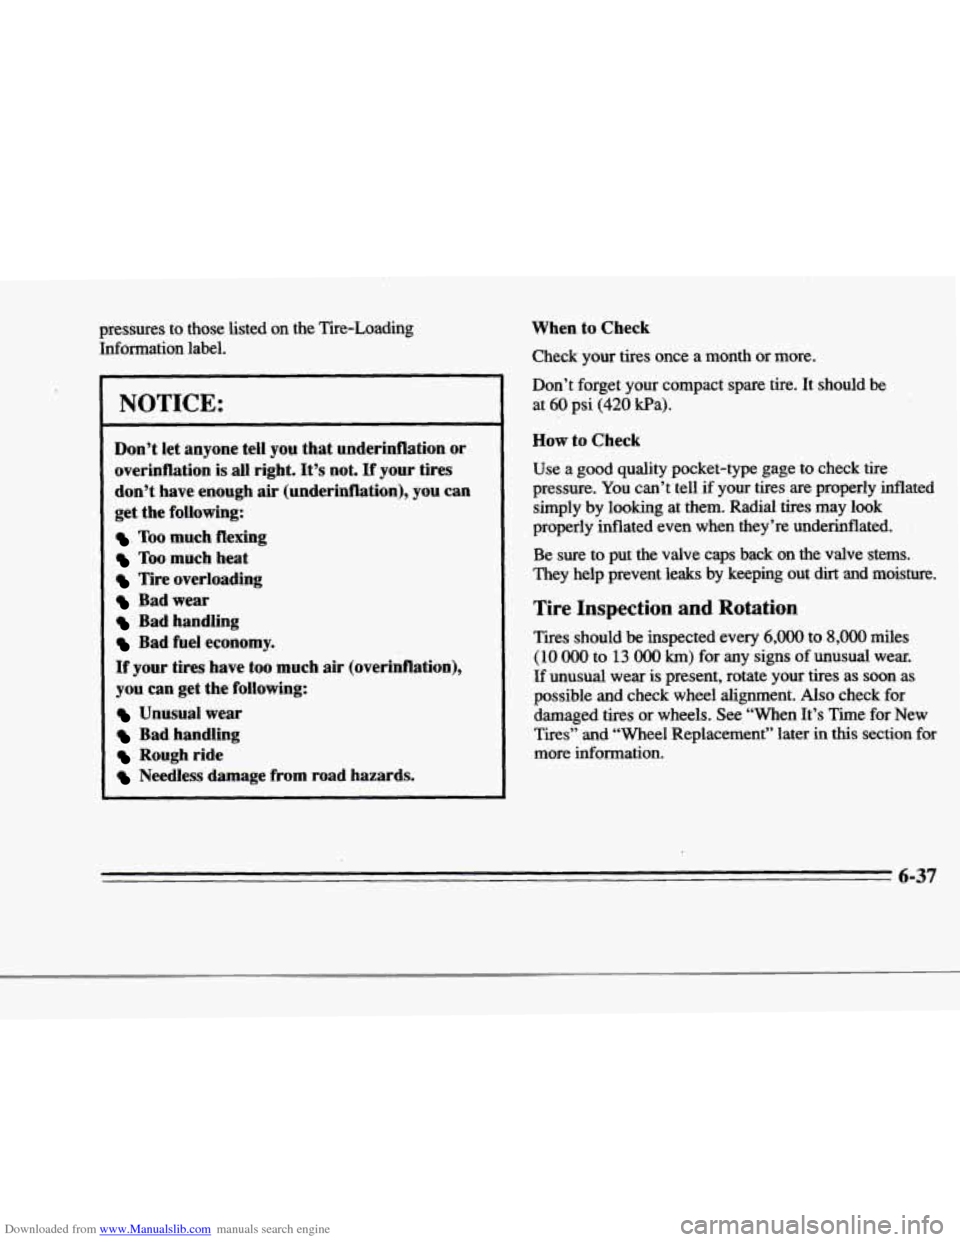 CADILLAC DEVILLE 1996 7.G Repair Manual Downloaded from www.Manualslib.com manuals search engine f 
f 
r 
I 
r 
r 
r 
?ressures  to  those  listed  on  the  Tire-Loading [nformation  label. 
NOTICE: 
Don’t  let anyone tell you that underi